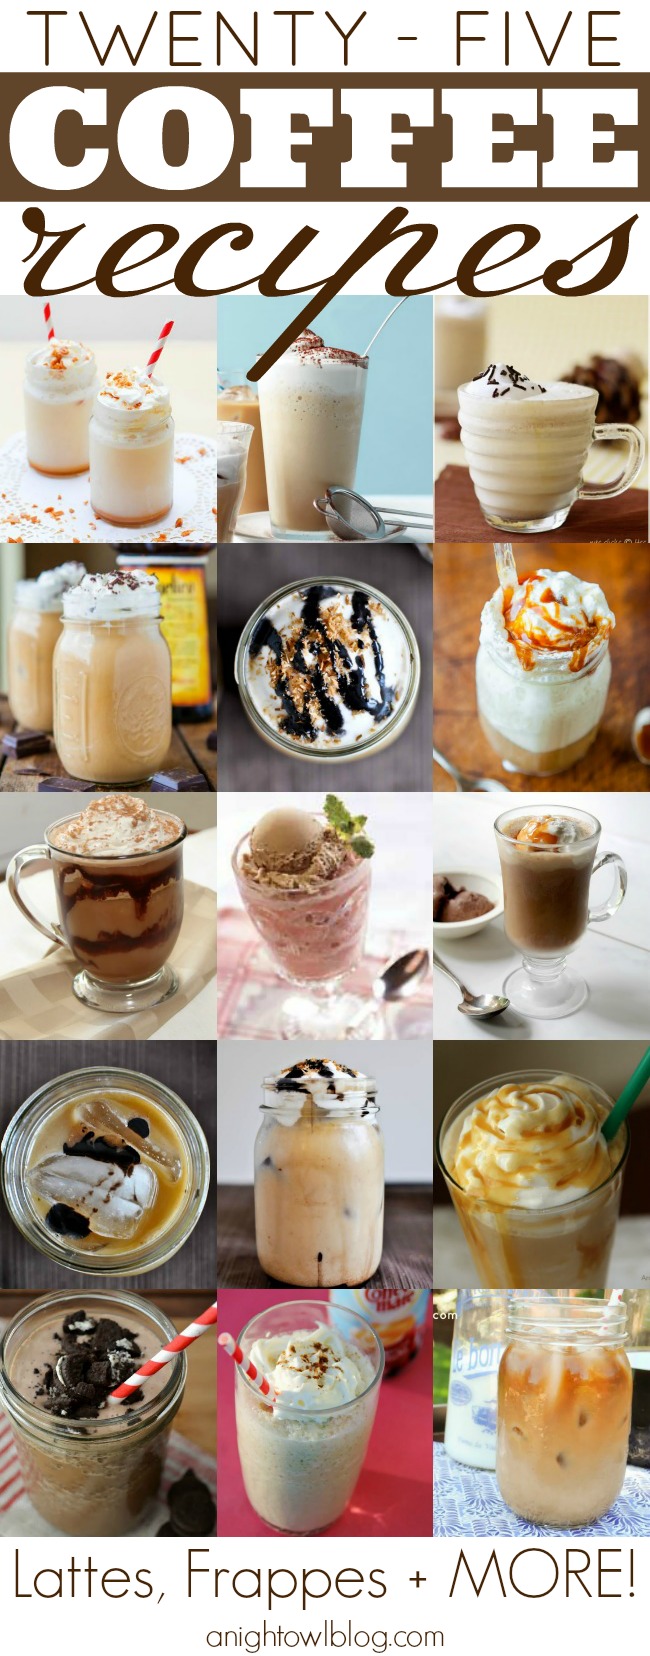 25+ Delicious Coffee Recipes - lattes, frappes and more!